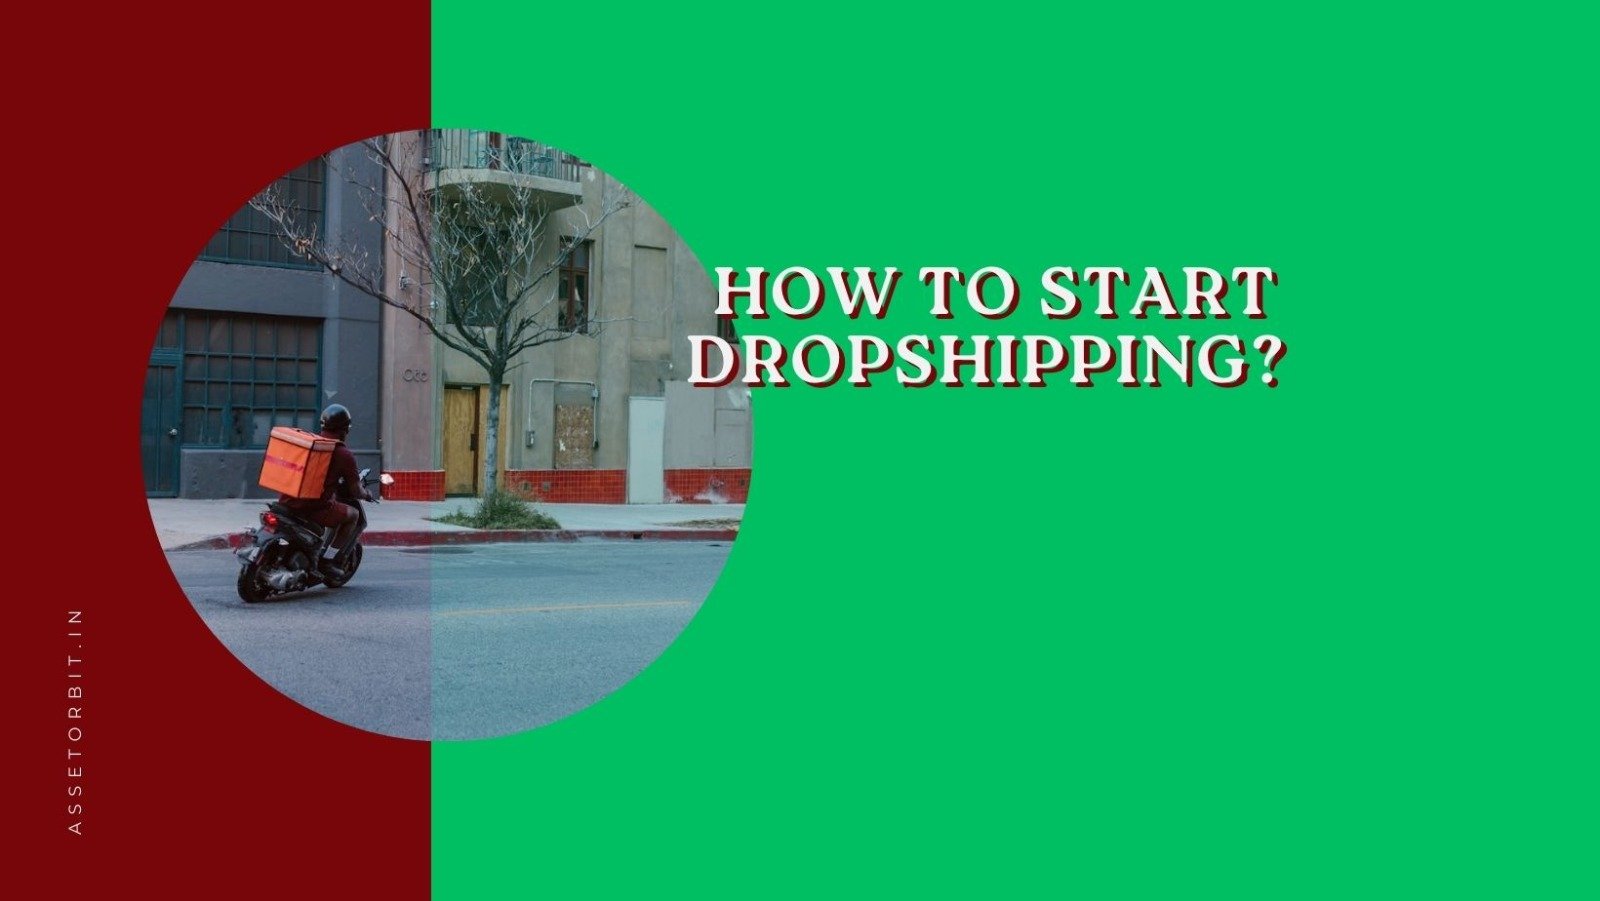 How to Start Dropshipping